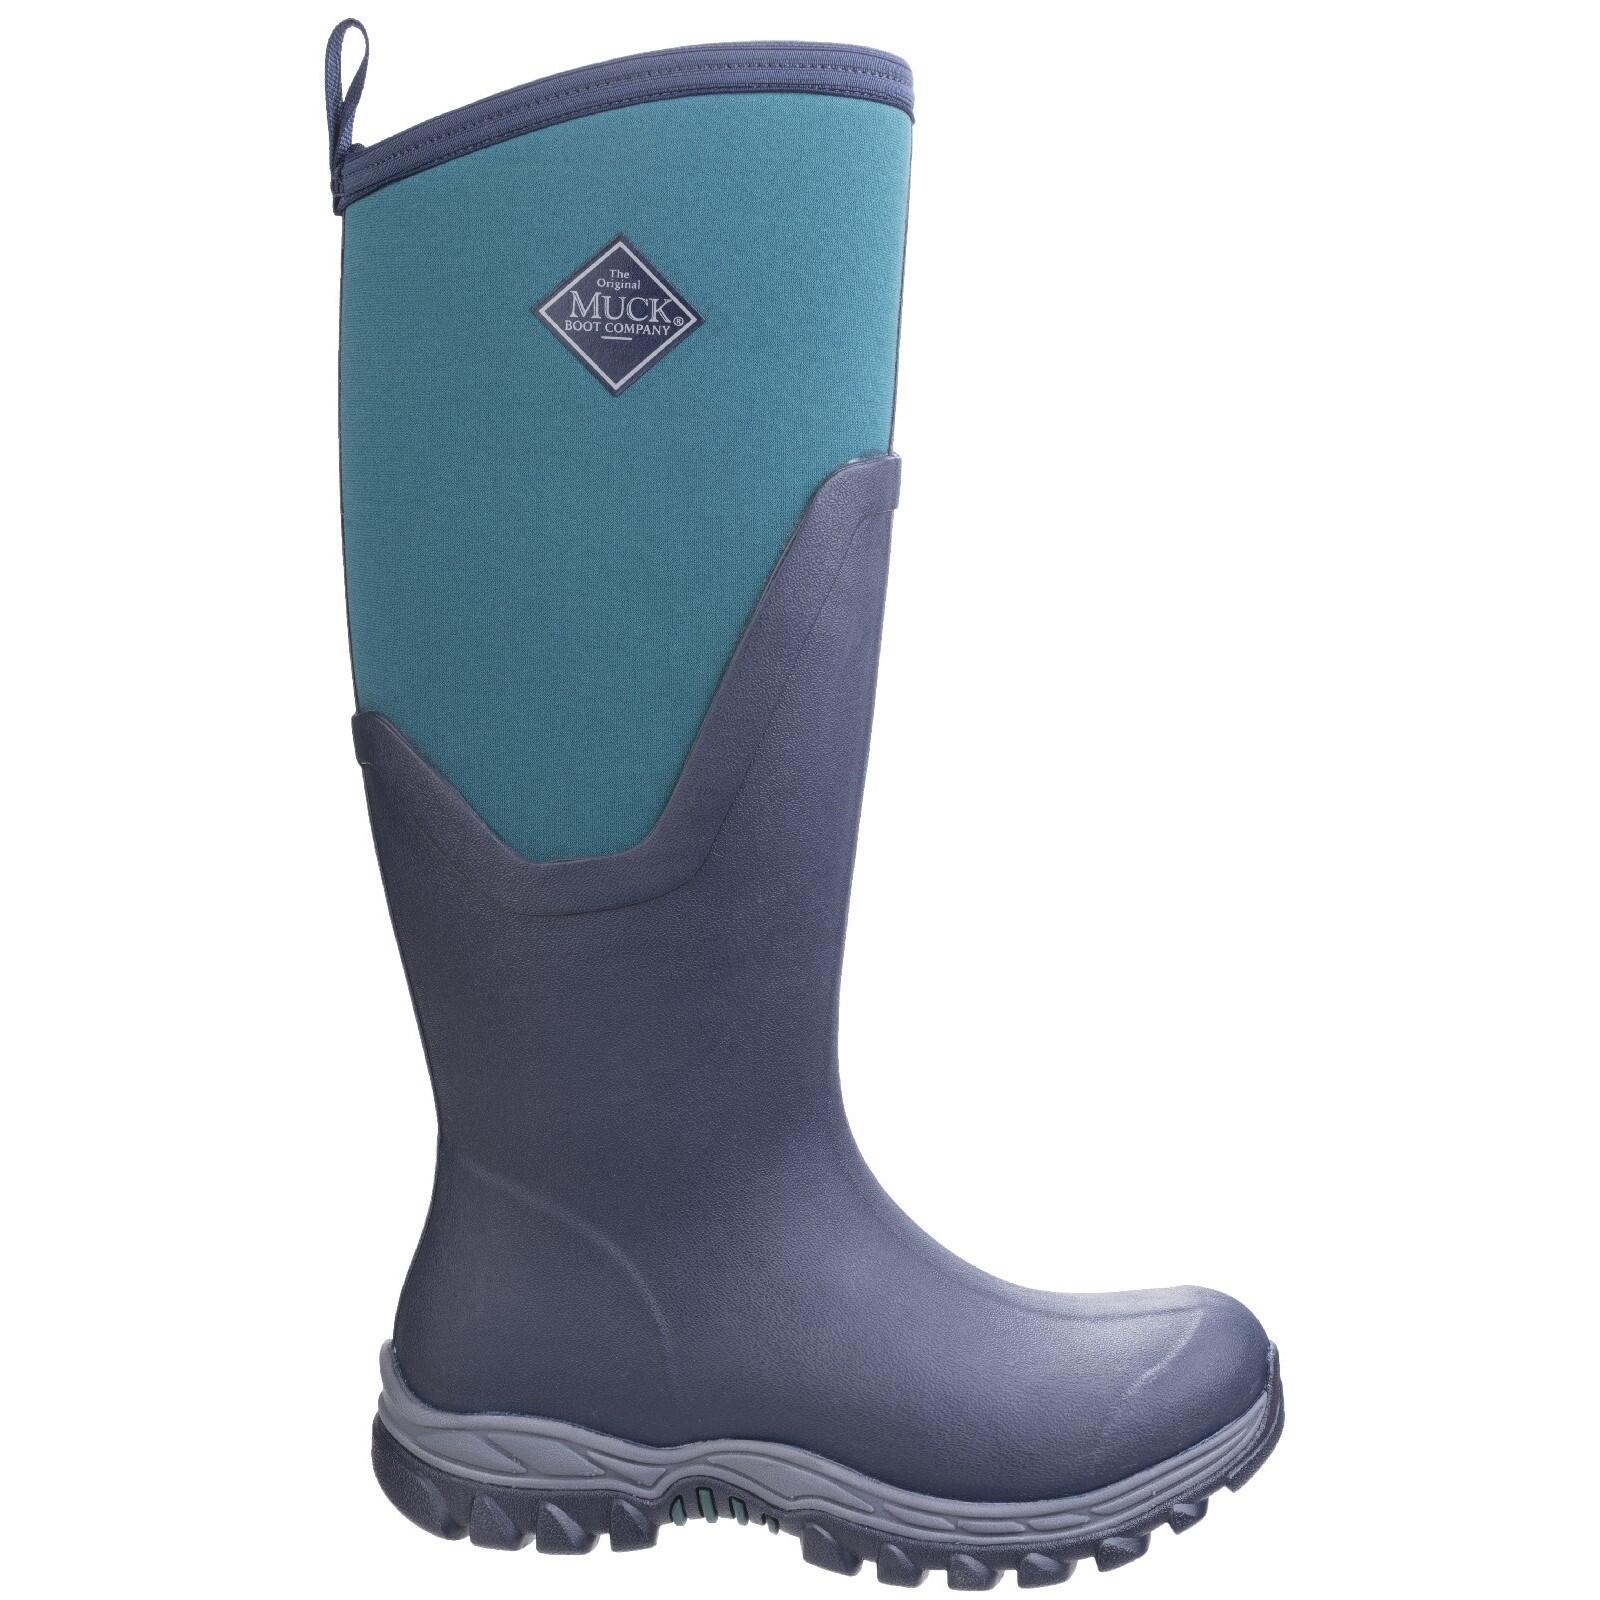 MUCK BOOTS Arctic Sport II Tall Textile/Weather Wellingtons Navy blue